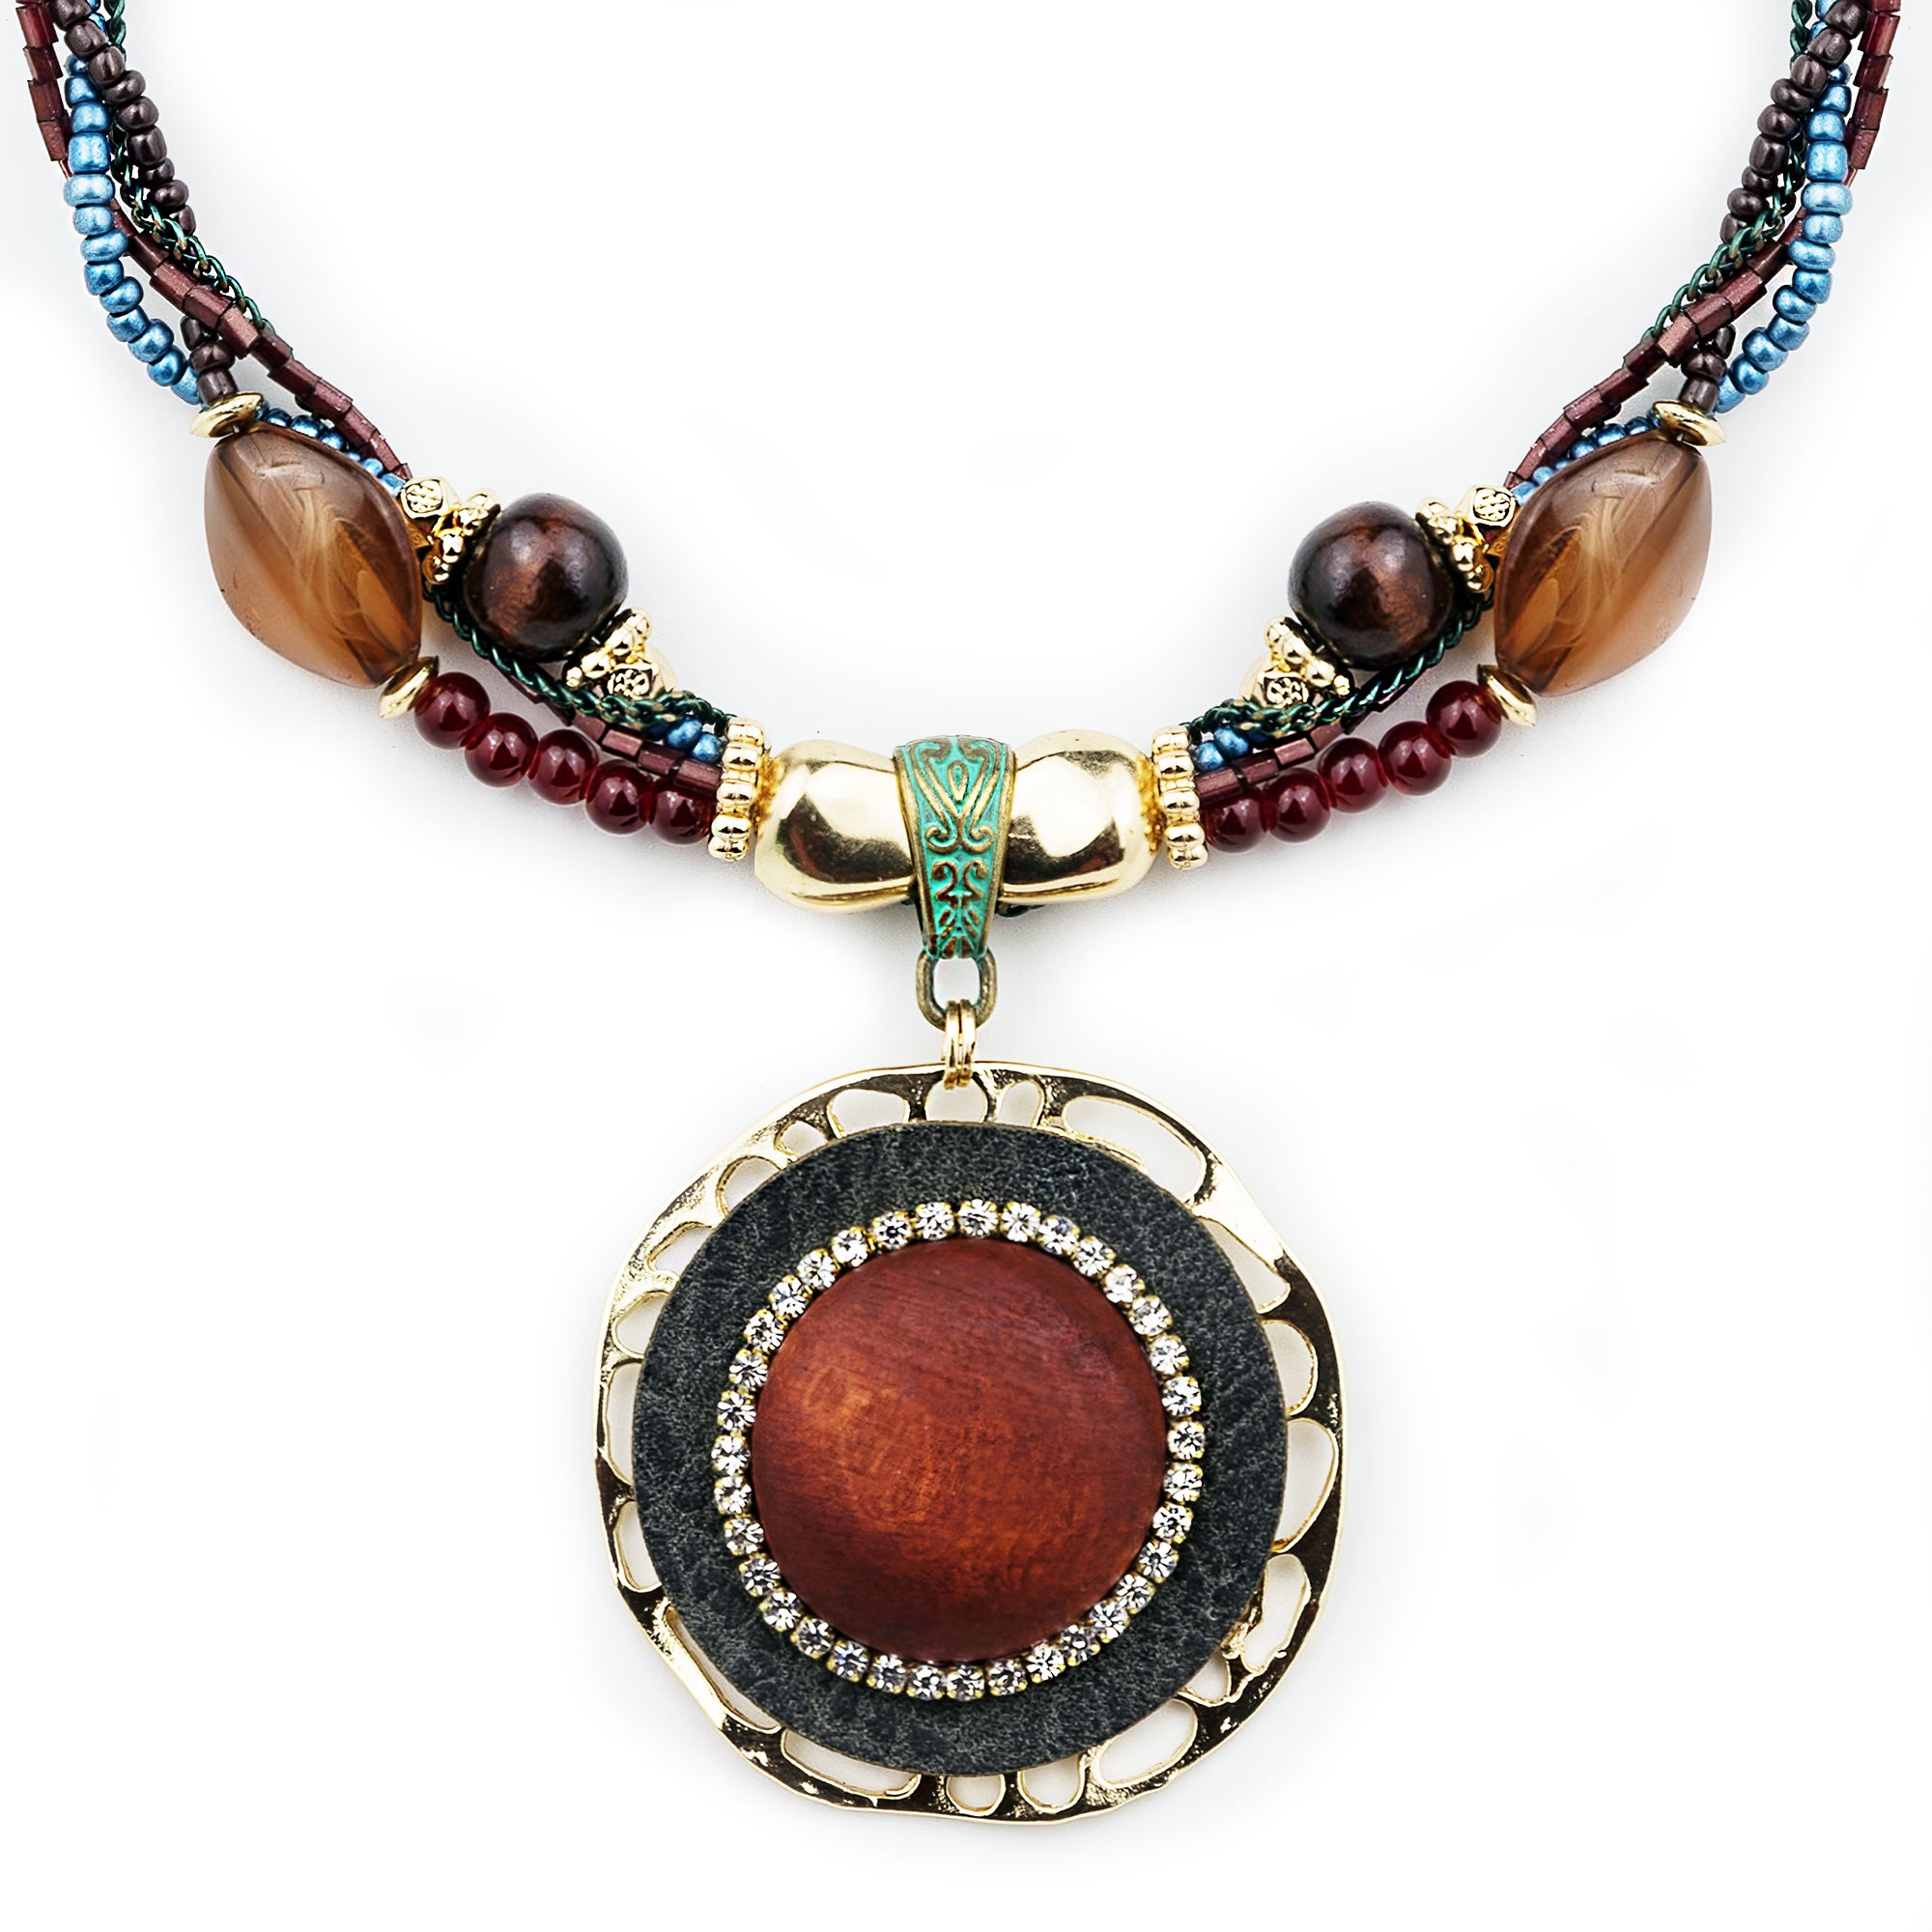 Unique Necklace Hand-Strung Beads Braided, Cubic Zirconia Encircling Wood, Crystal, Santa Fe S038-03